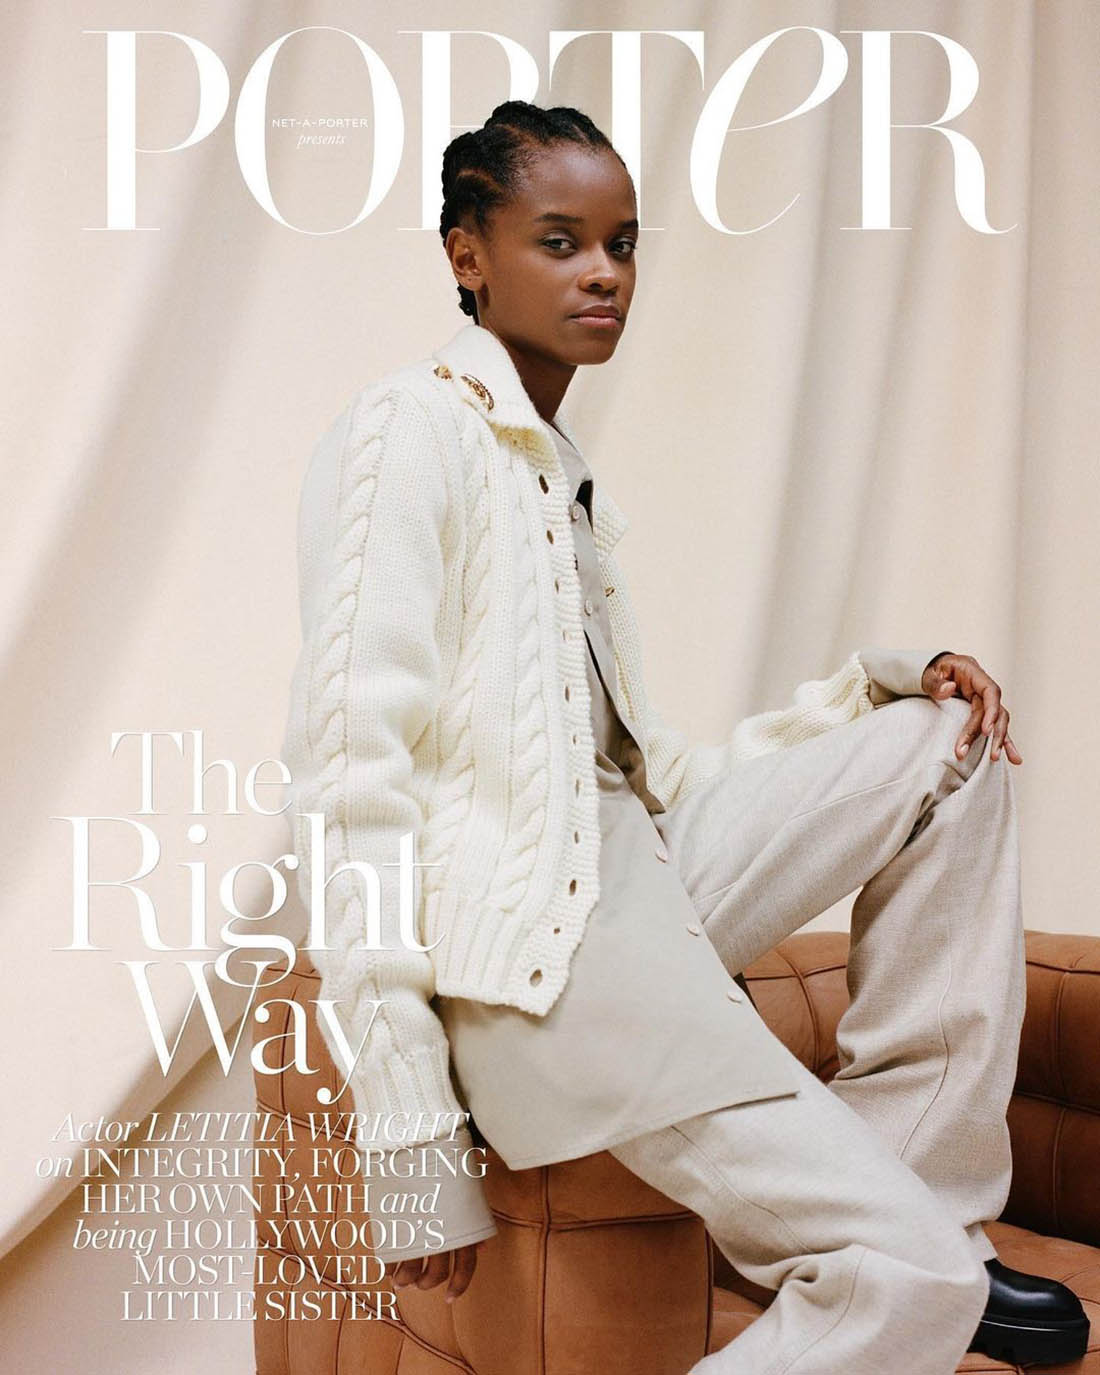 Letitia Wright covers Porter Magazine October 19th, 2020 by Ekua King